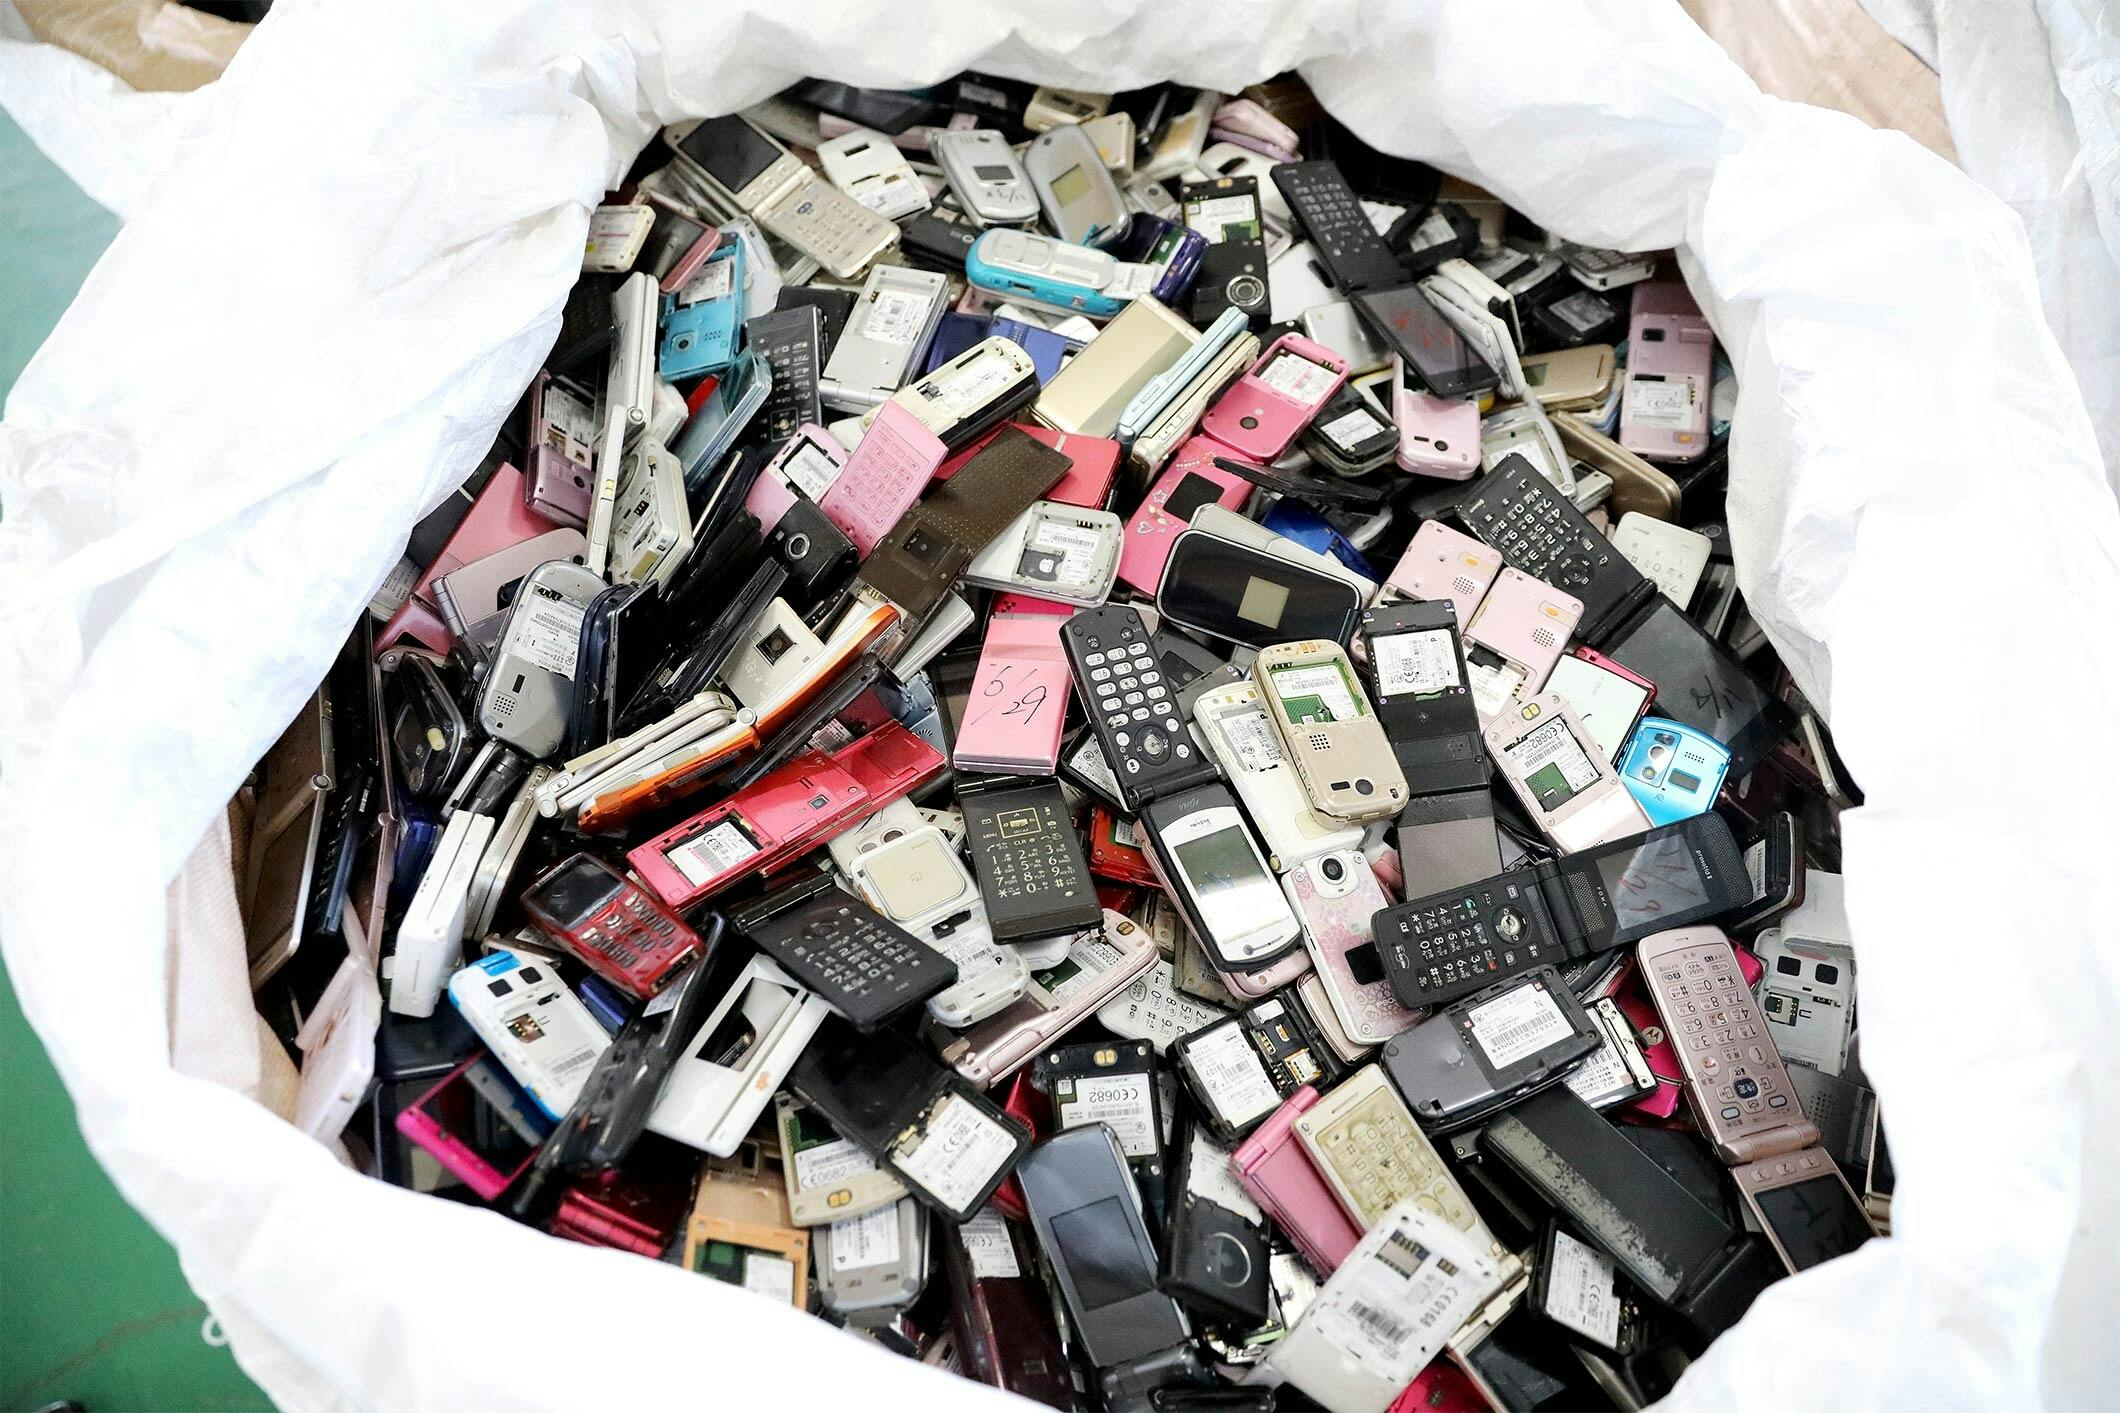 a bag of old phones